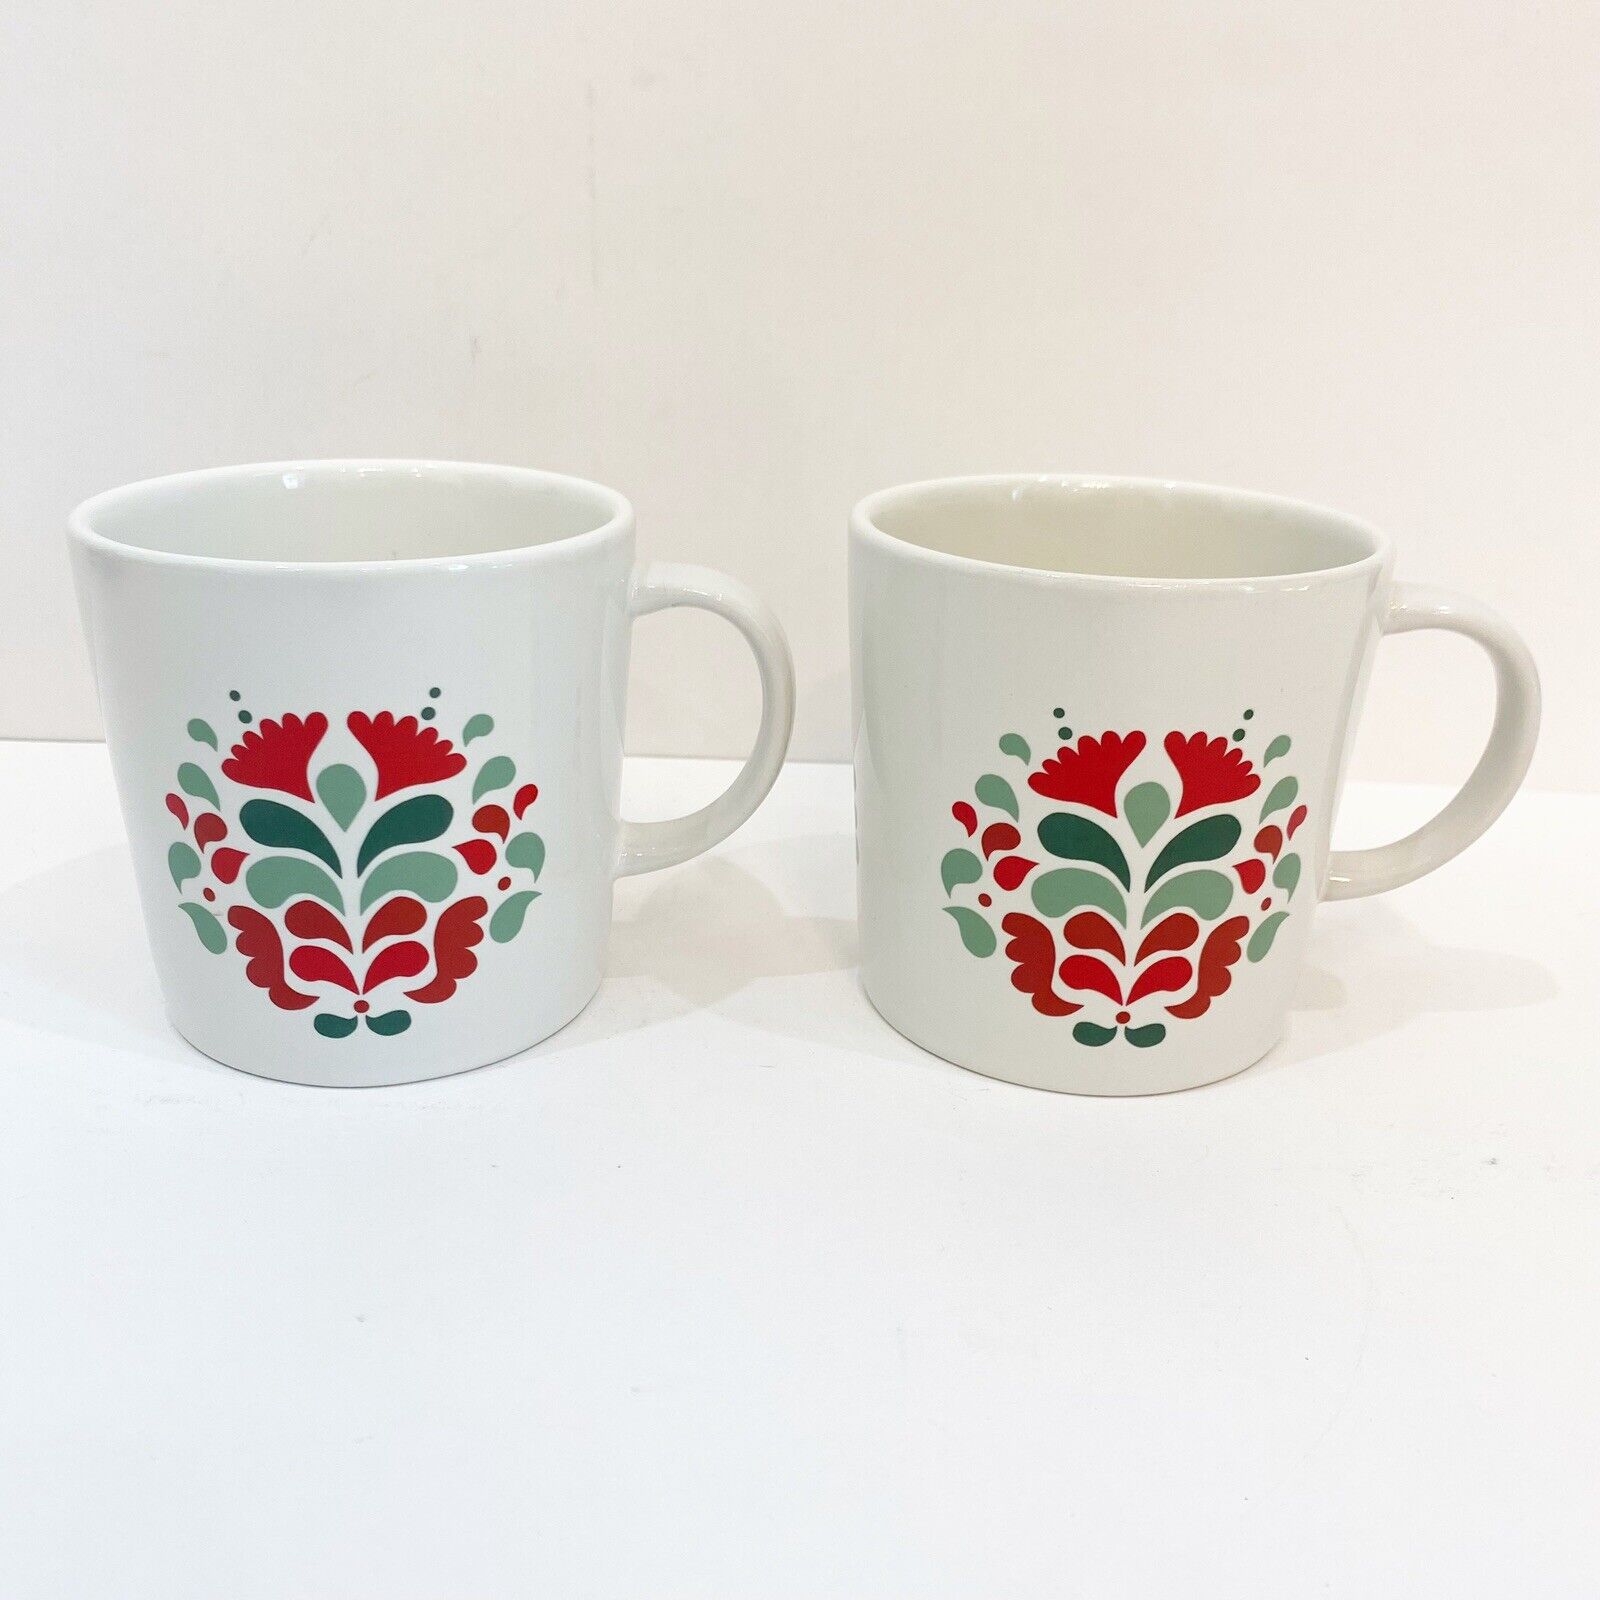 IKEA VINTERFINTMug, floral pattern white/red, Set Of 2 NWT Unavailable In Stores